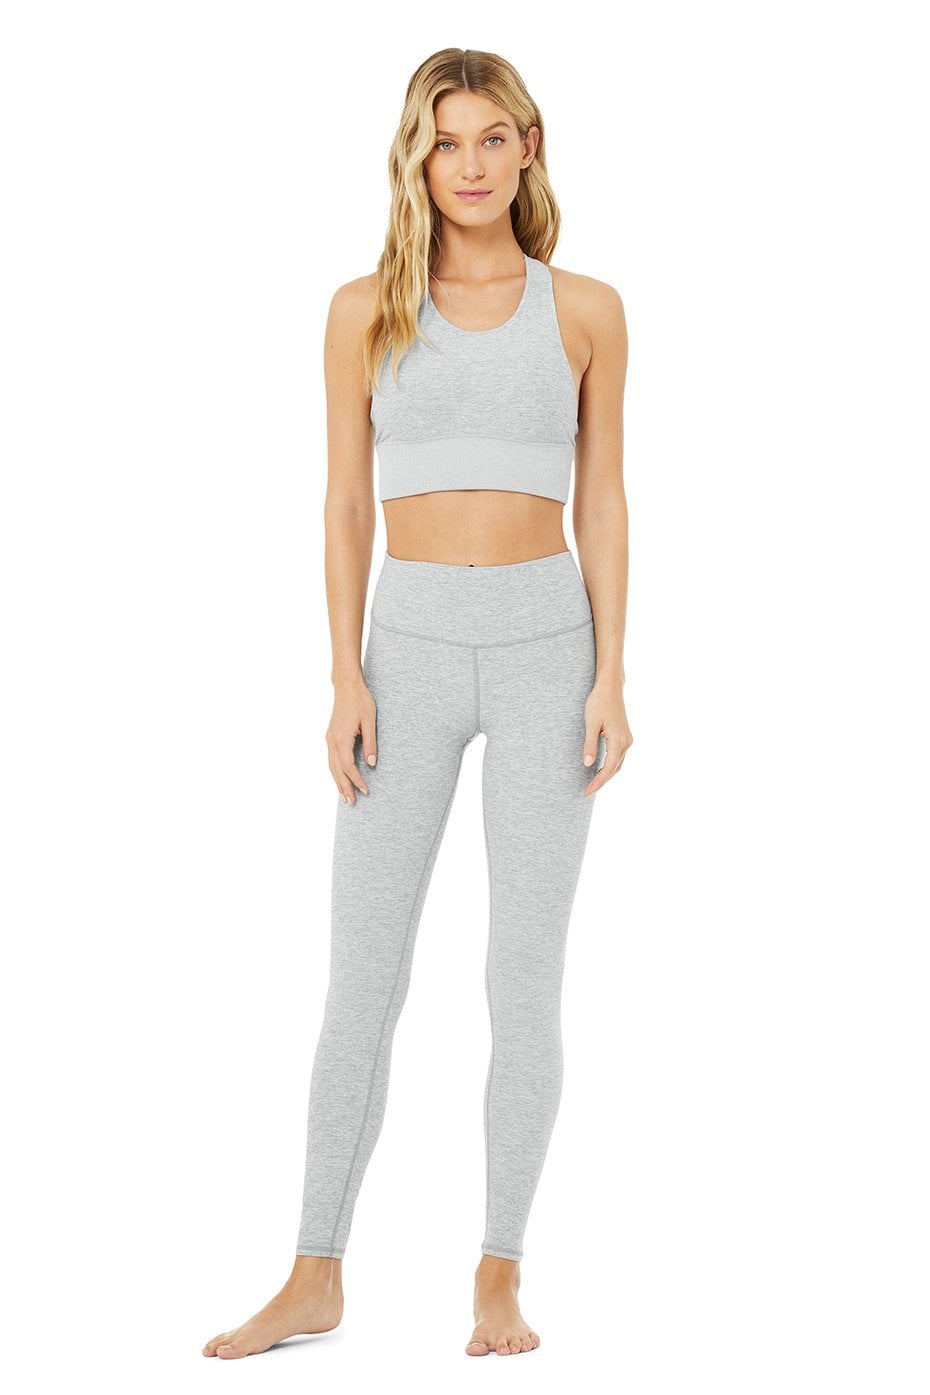 High-Waist Alosoft Highlight Legging & Serenity Bra Set, Alo Has a Bunch  of Cute Sets You Can Both Work Out and Lounge In